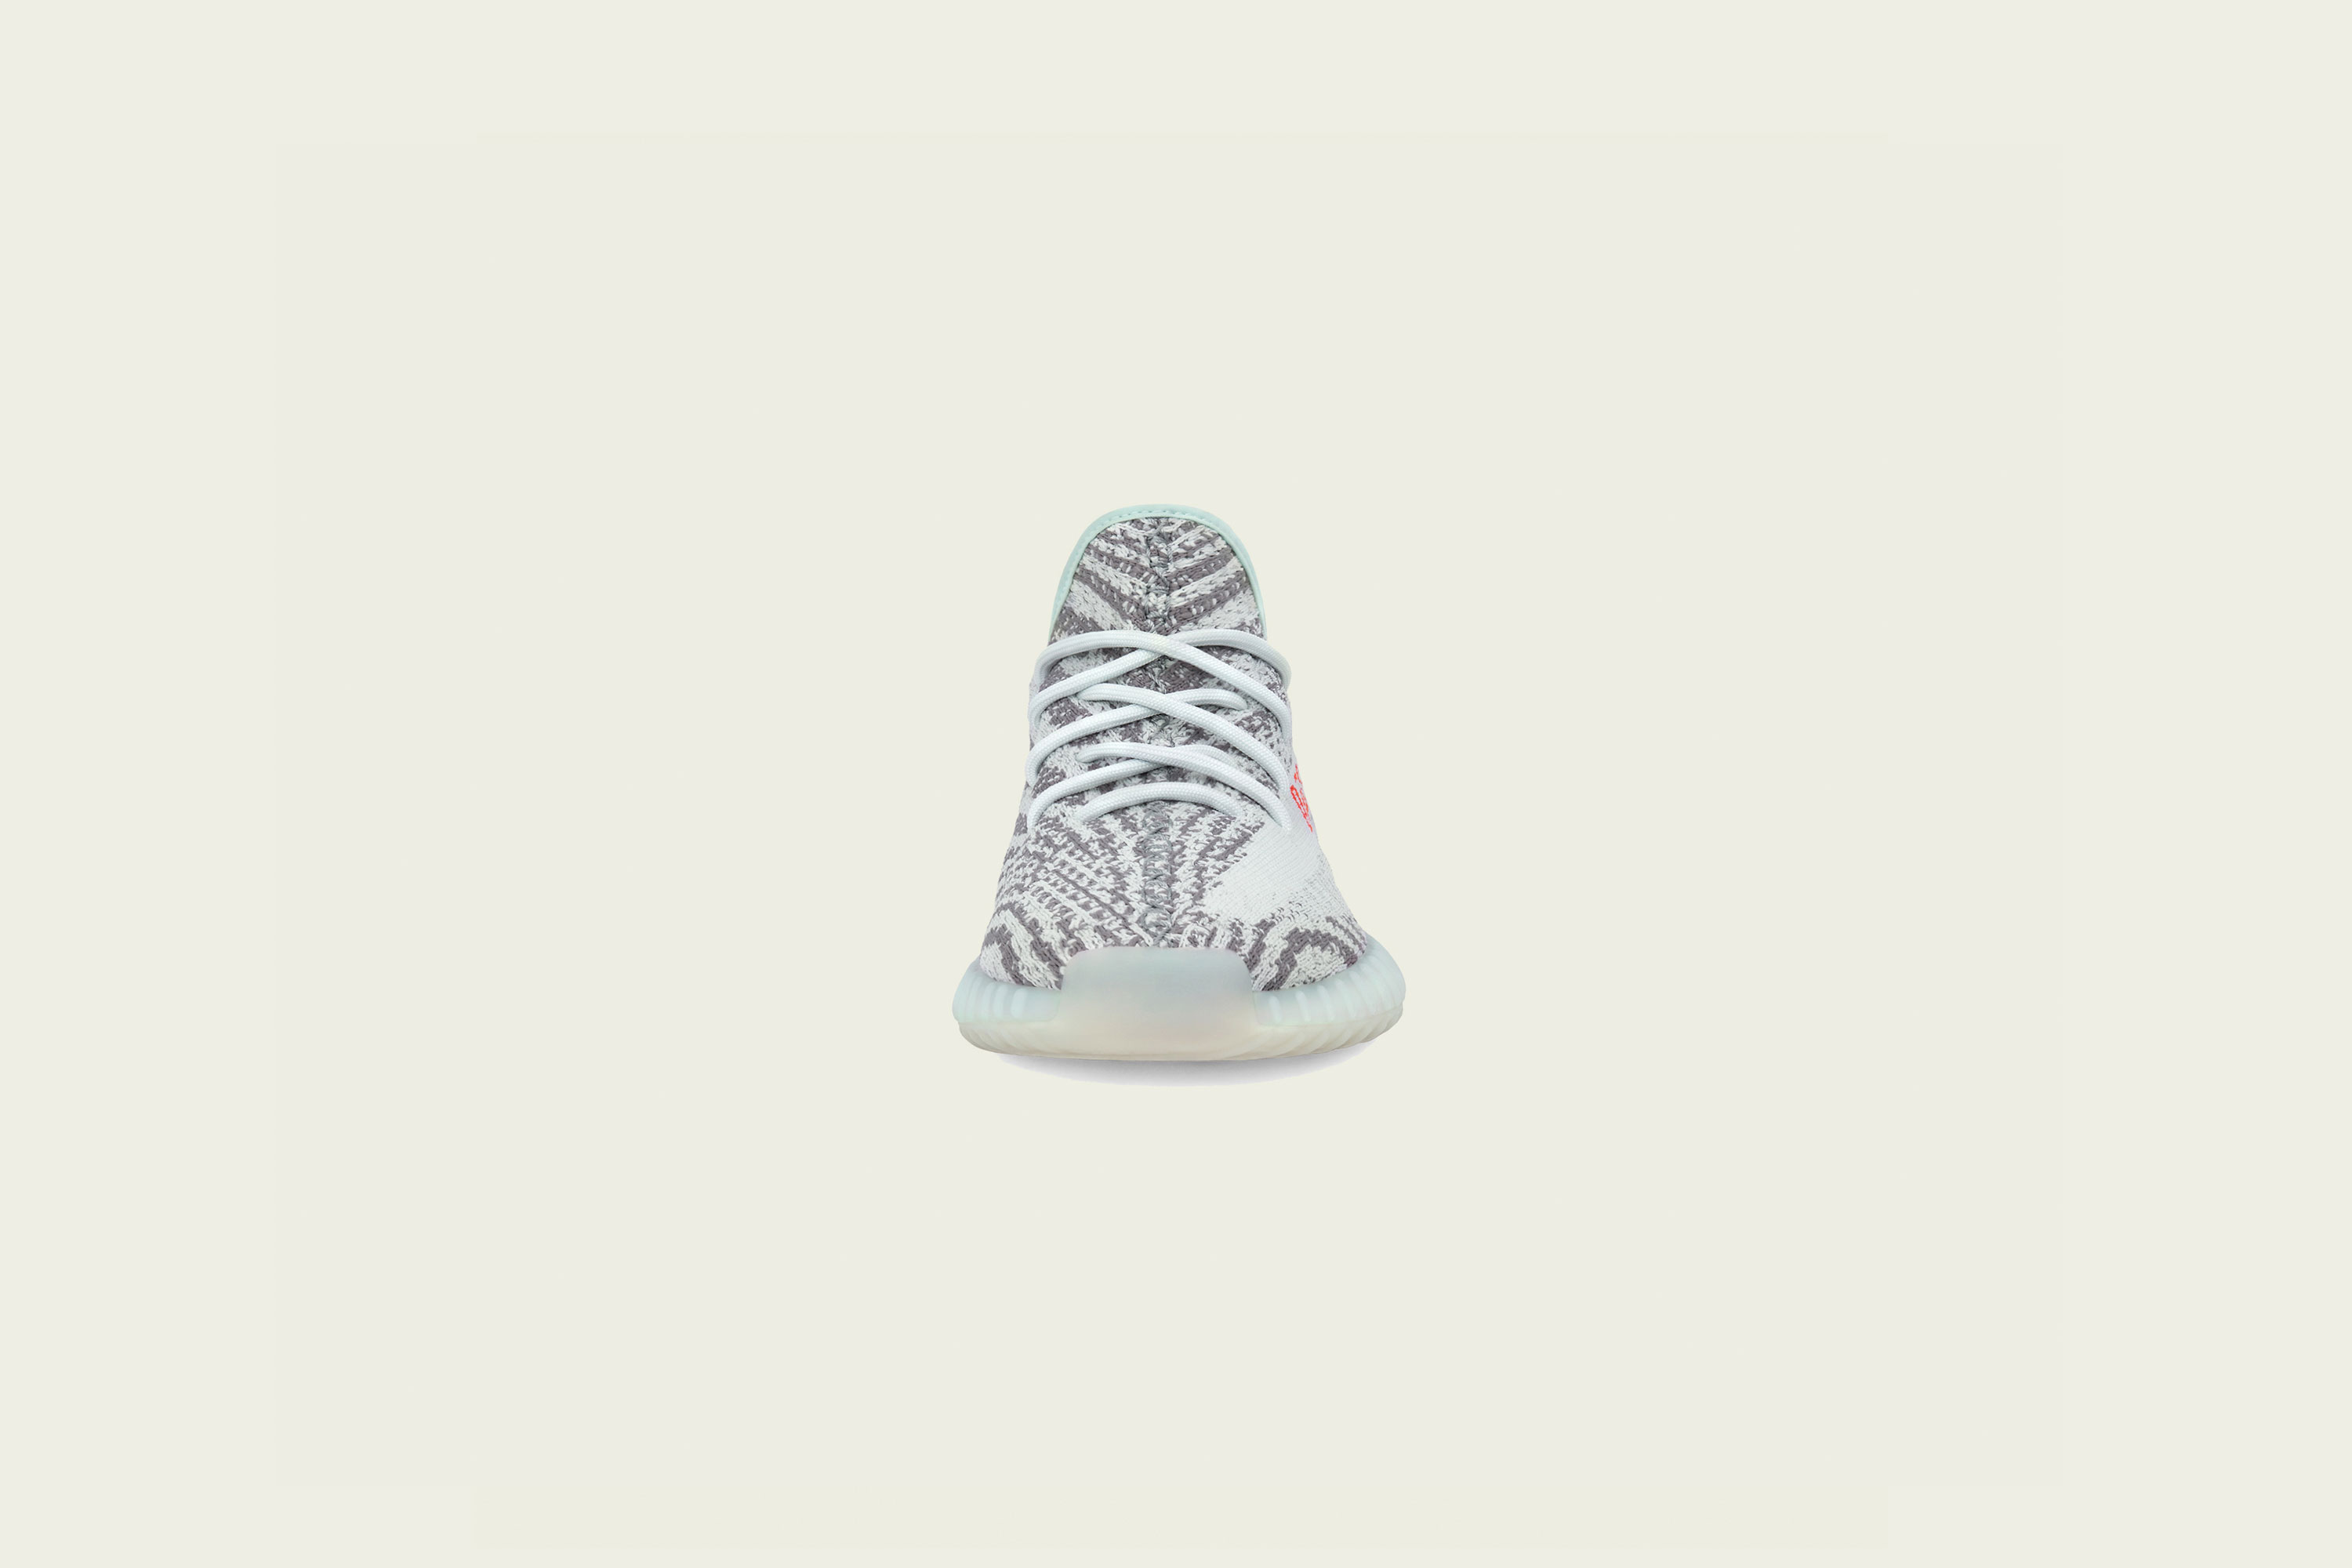 adidas - Yeezy Boost 350v2 - Blue Tint - Up There